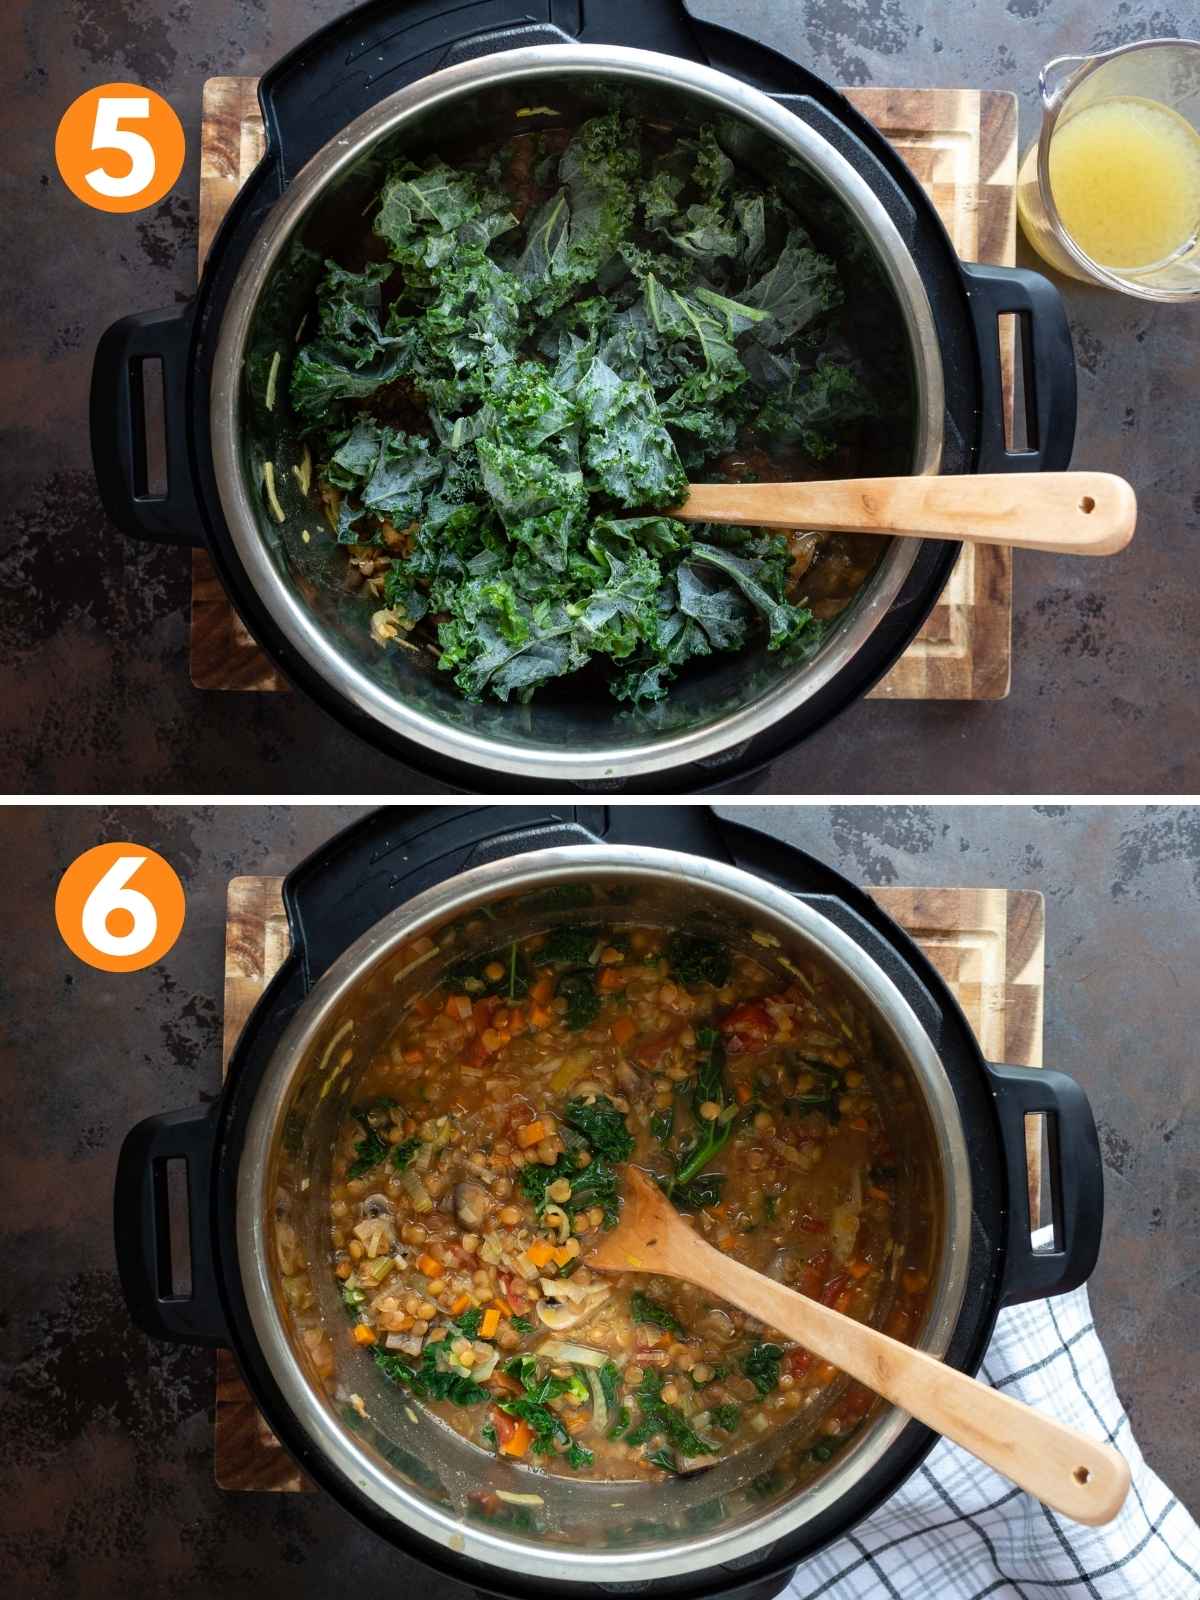 Kale added to the pot and lentil stew cooked in instant pot.